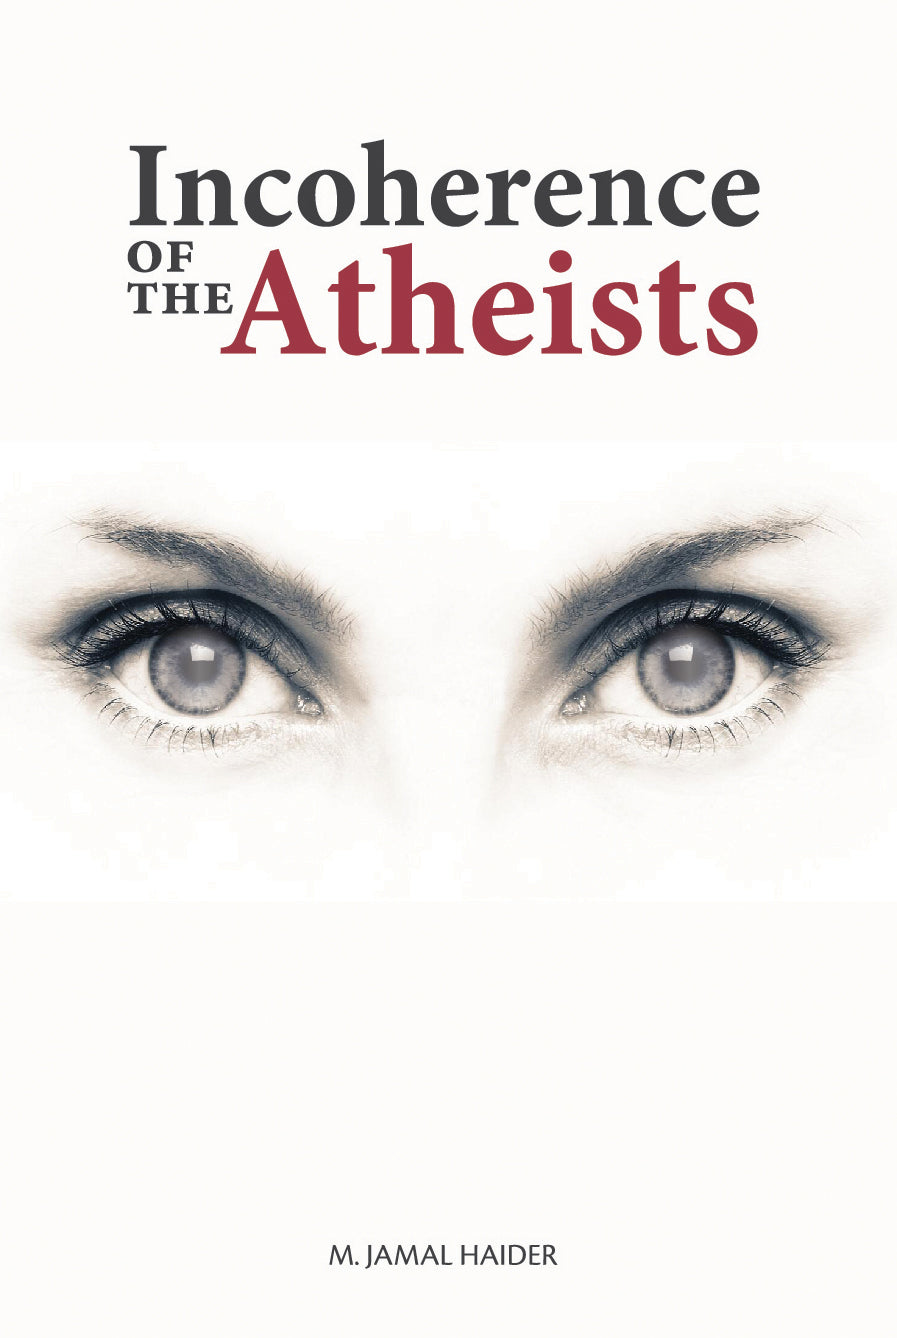 Incoherence of the Atheists